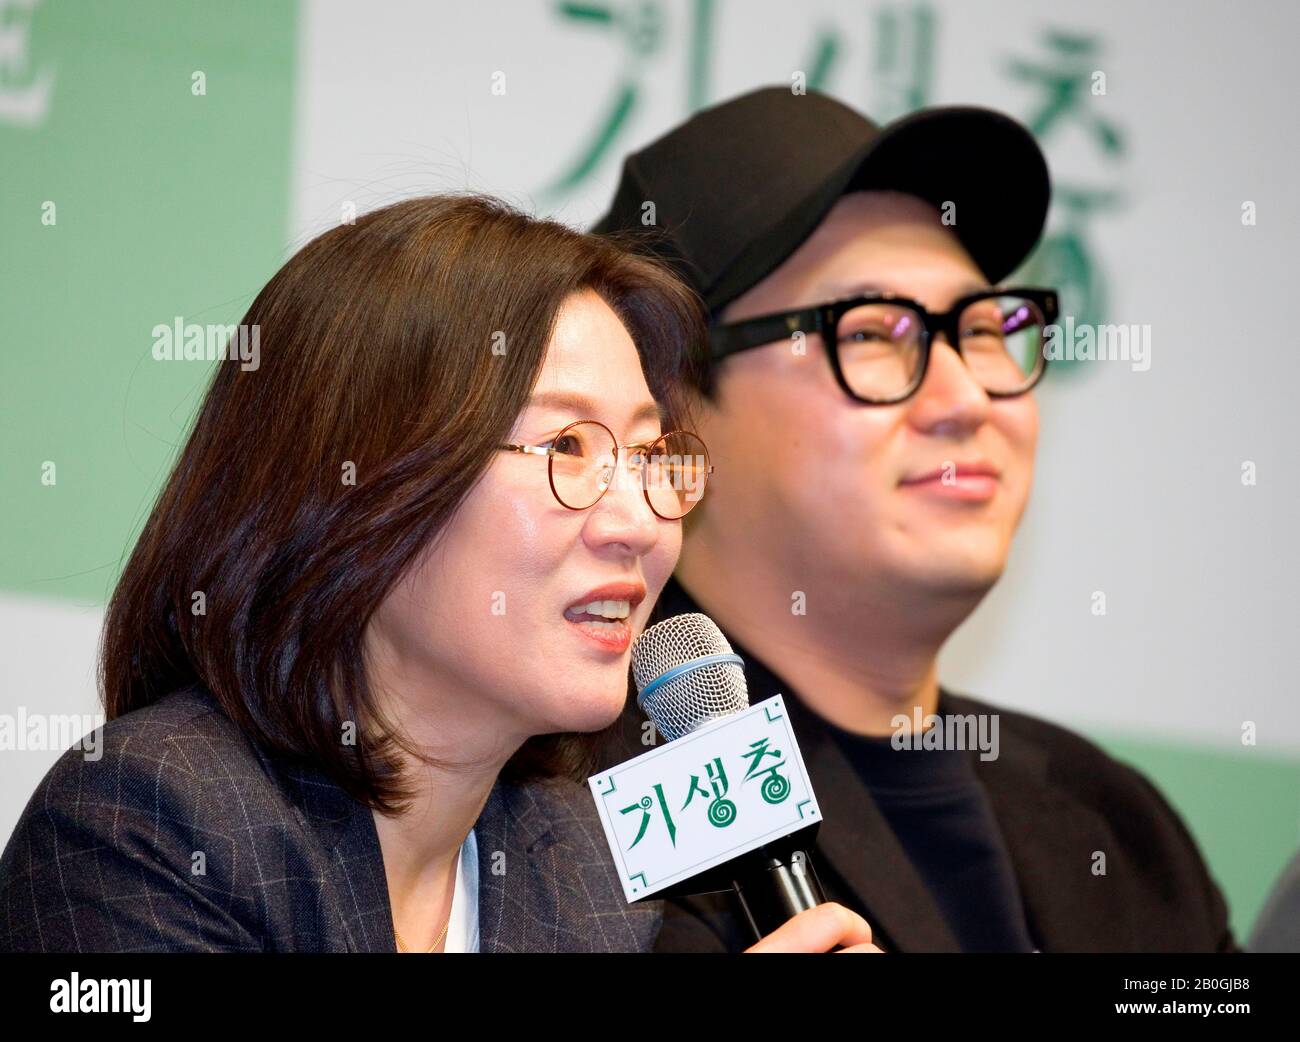 Kwak Sin-Ae and Han Jin-Won, Feb 19, 2020 : Kwak Sin-Ae (L), the CEO of the Barunson Entertainment & Arts Corporation and a film producer of the Oscar-winning film 'Parasite' and Han Jin-Won who is a co-screenwriter of the movie attend a press conference in Seoul, South Korea. Korean black comedy thriller 'Parasite' won four Oscar titles at the Academy Awards on Feb 9, 2020, becoming the first non-English language film to win the Oscars Best Picture in its 92-year history. Credit: Lee Jae-Won/AFLO/Alamy Live News Stock Photo